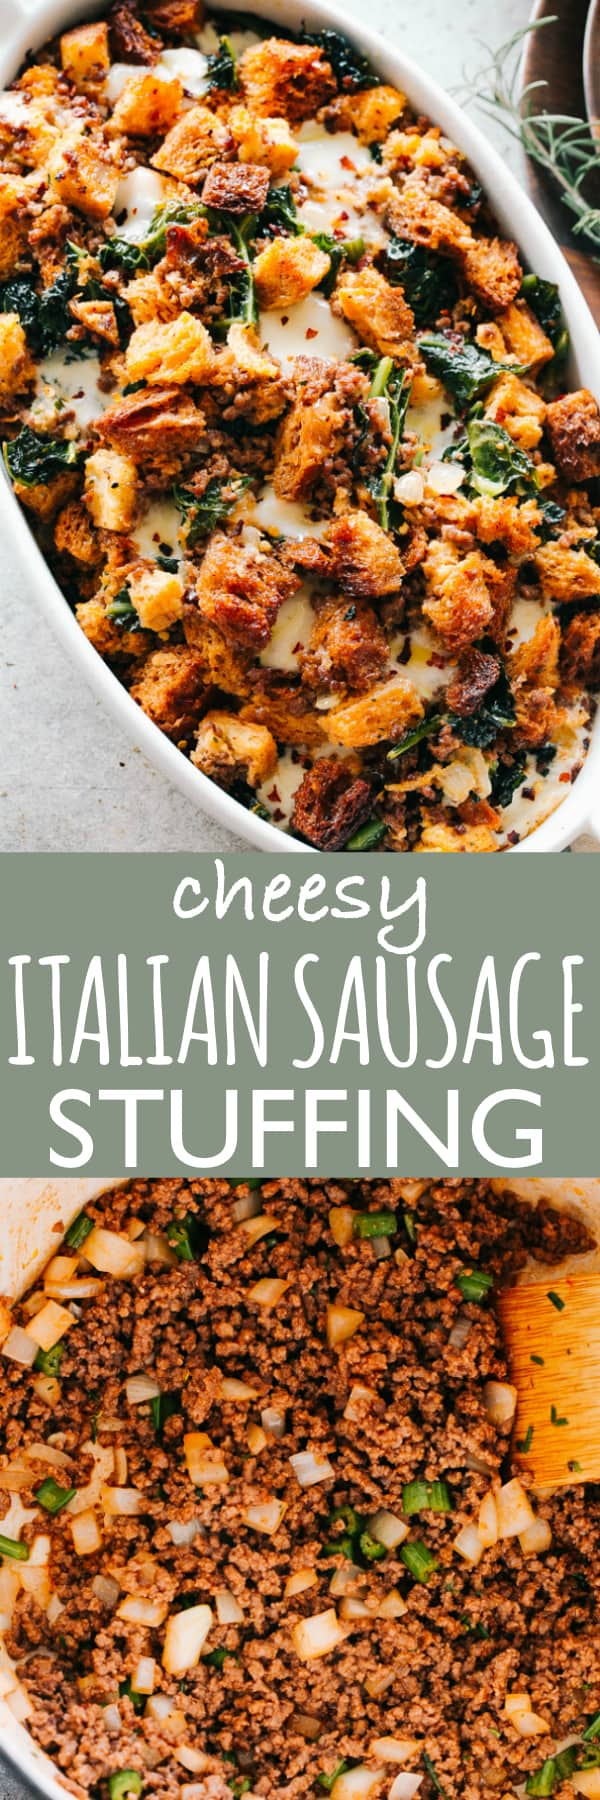 Cheesy Italian Sausage Stuffing Recipe - An incredible Thanksgiving stuffing prepared with Italian sausage, kale, and provolone cheese! A wonderful combination of savory, hearty, and cheesy, all in one bite. #thanksgiving #thanksgivingstuffing #stuffing #turkeystuffing #italian #sausages #holidaydinner #cheese #kale #tuscany